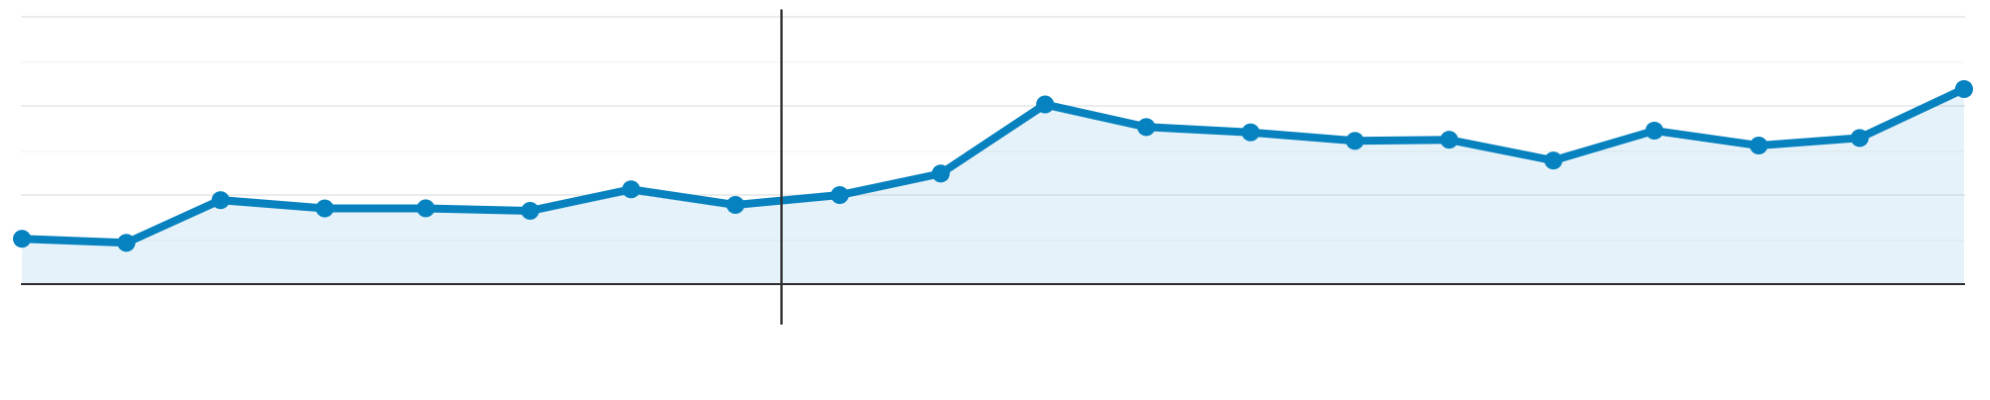 What your Google Analytics should look like...